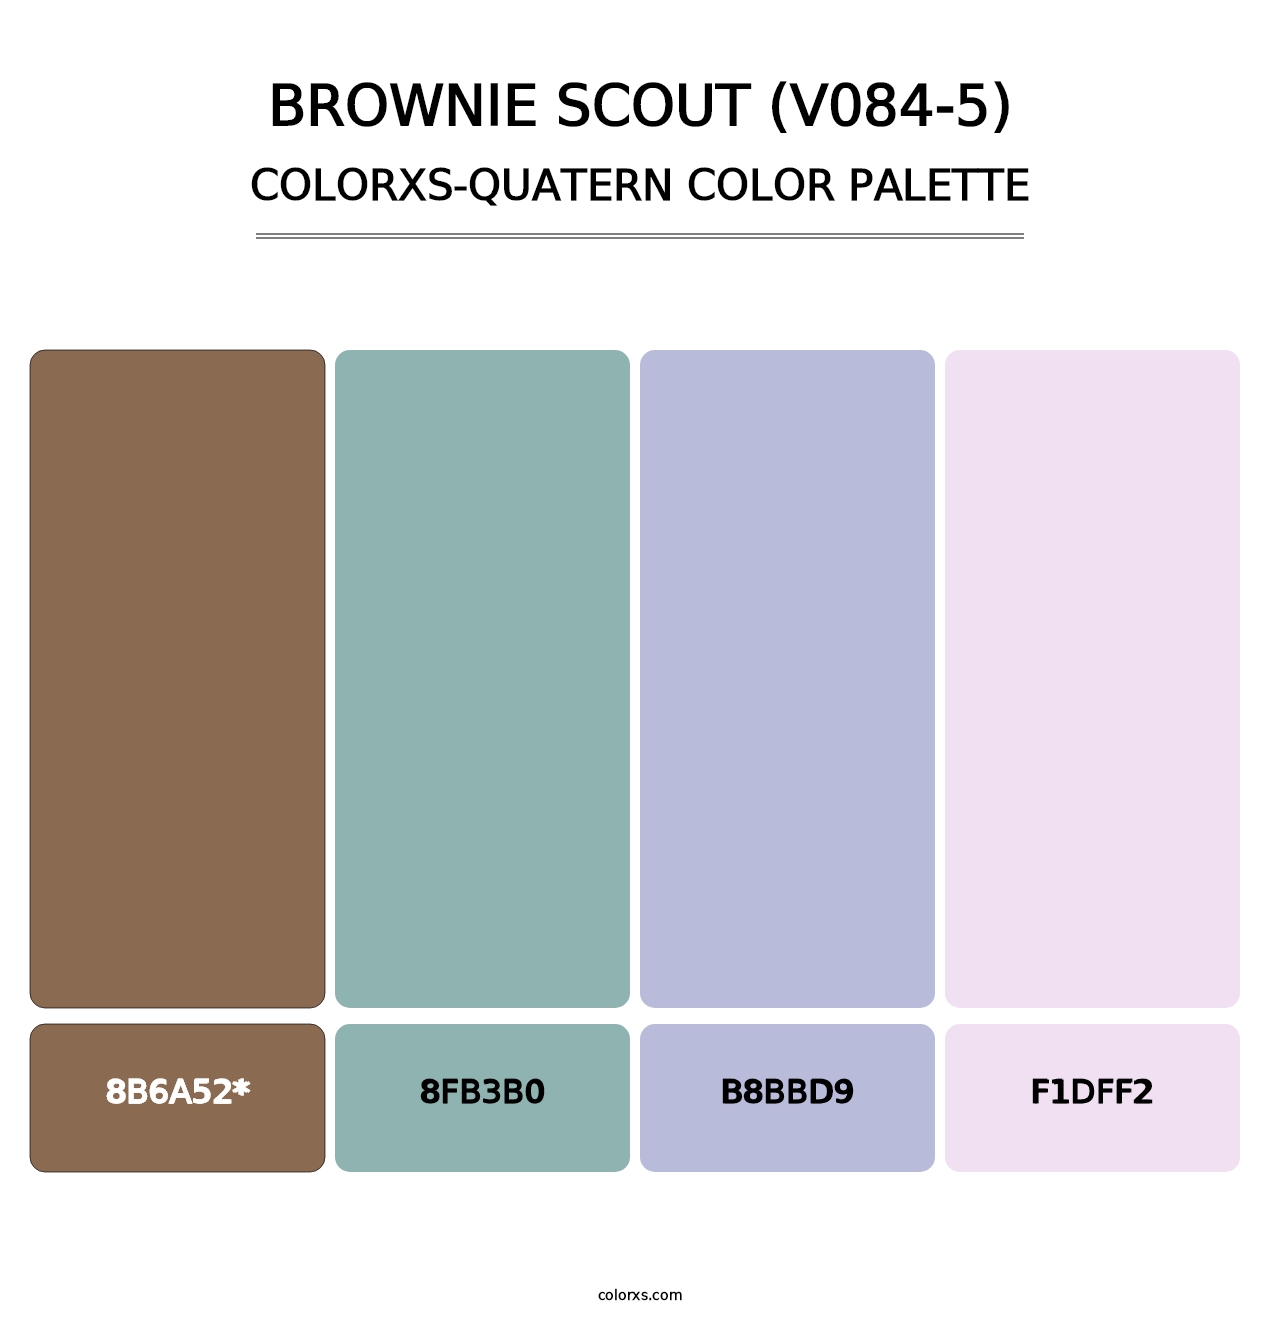 Brownie Scout (V084-5) - Colorxs Quatern Palette